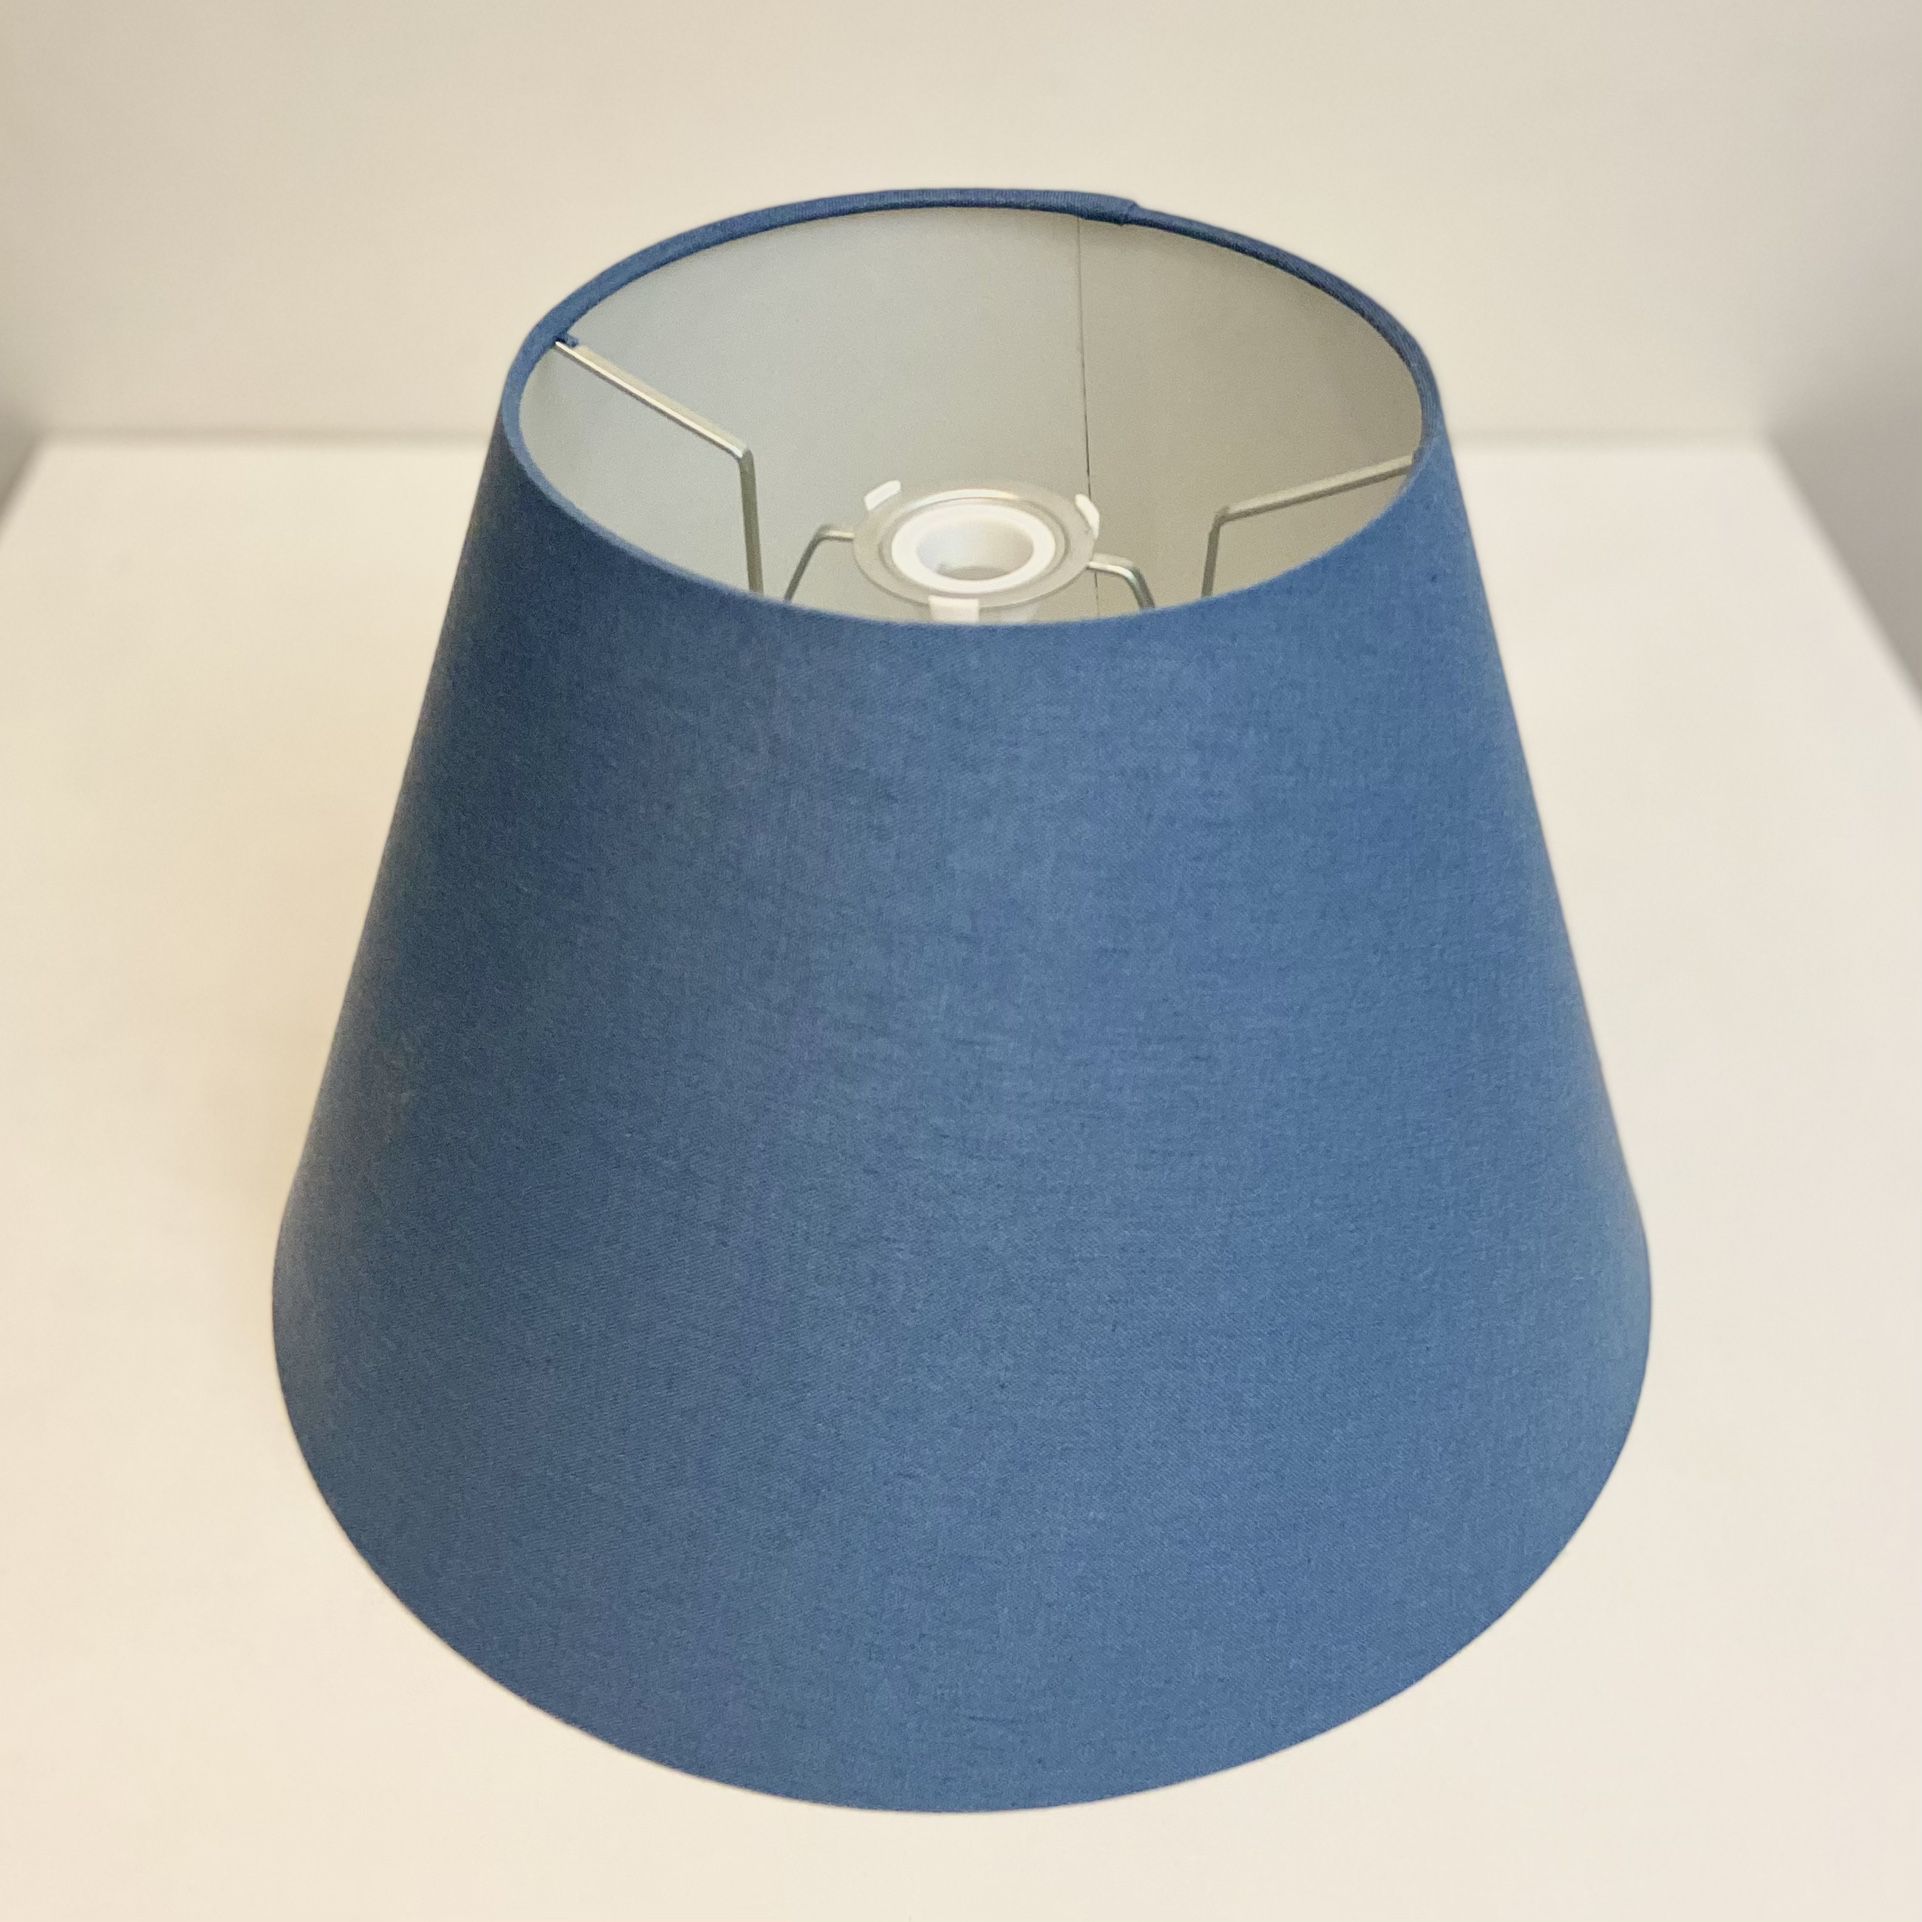 IKEA OLLSTA Textile Lamp-Shade, Blue •Large (last pic for size w a coke can) •Height 12”, Bottom Diameter 16.75”, Top Diameter 8.75” In MintCondition 